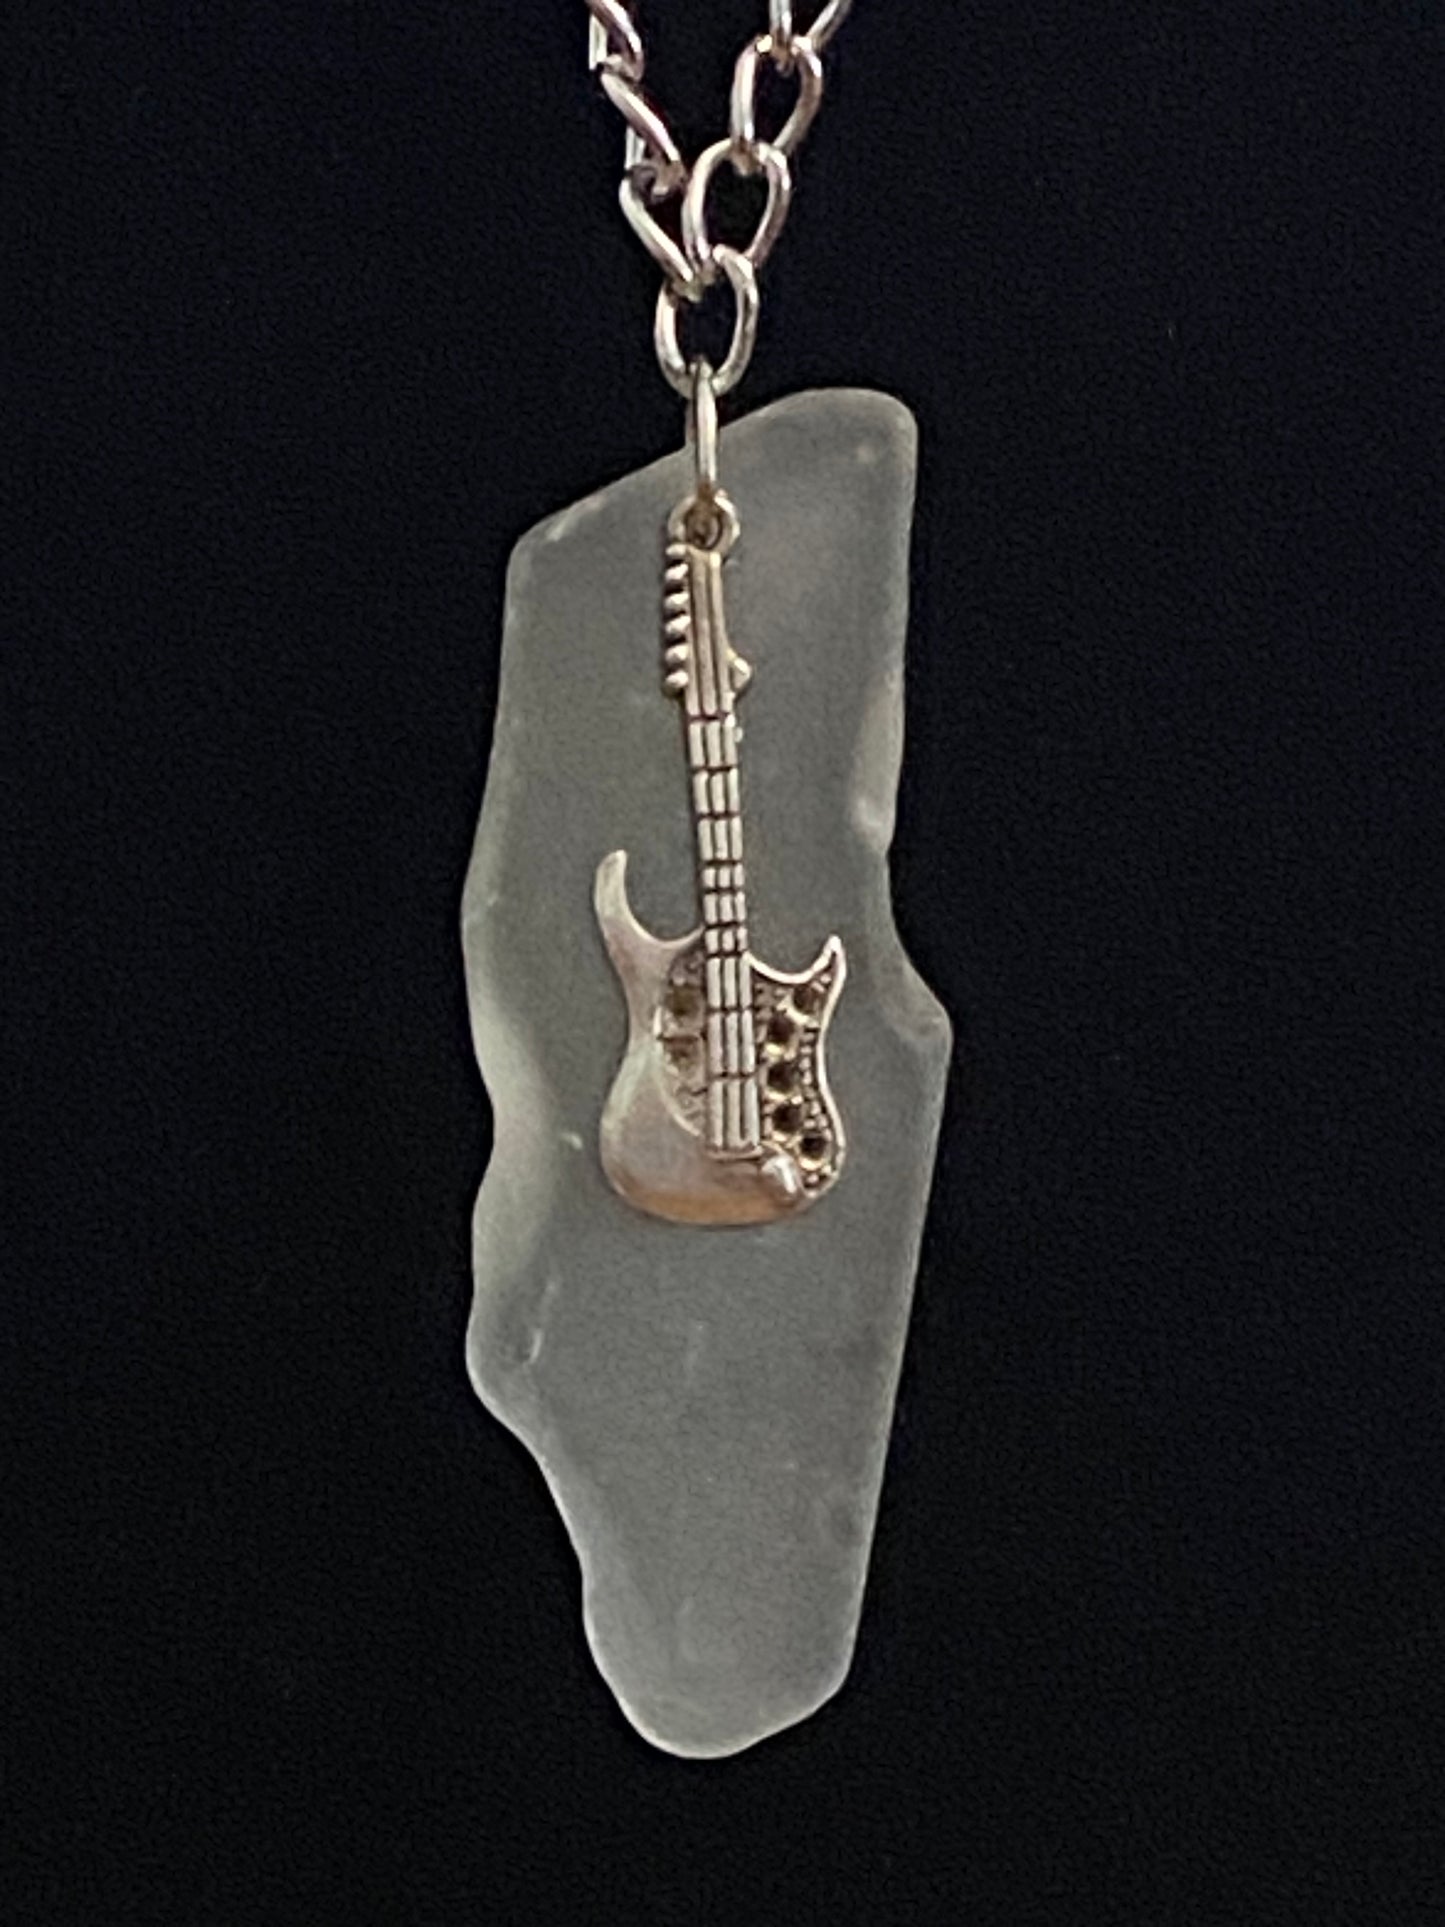 White Sea Glass with Guitar Charm & Silver Chain Necklace